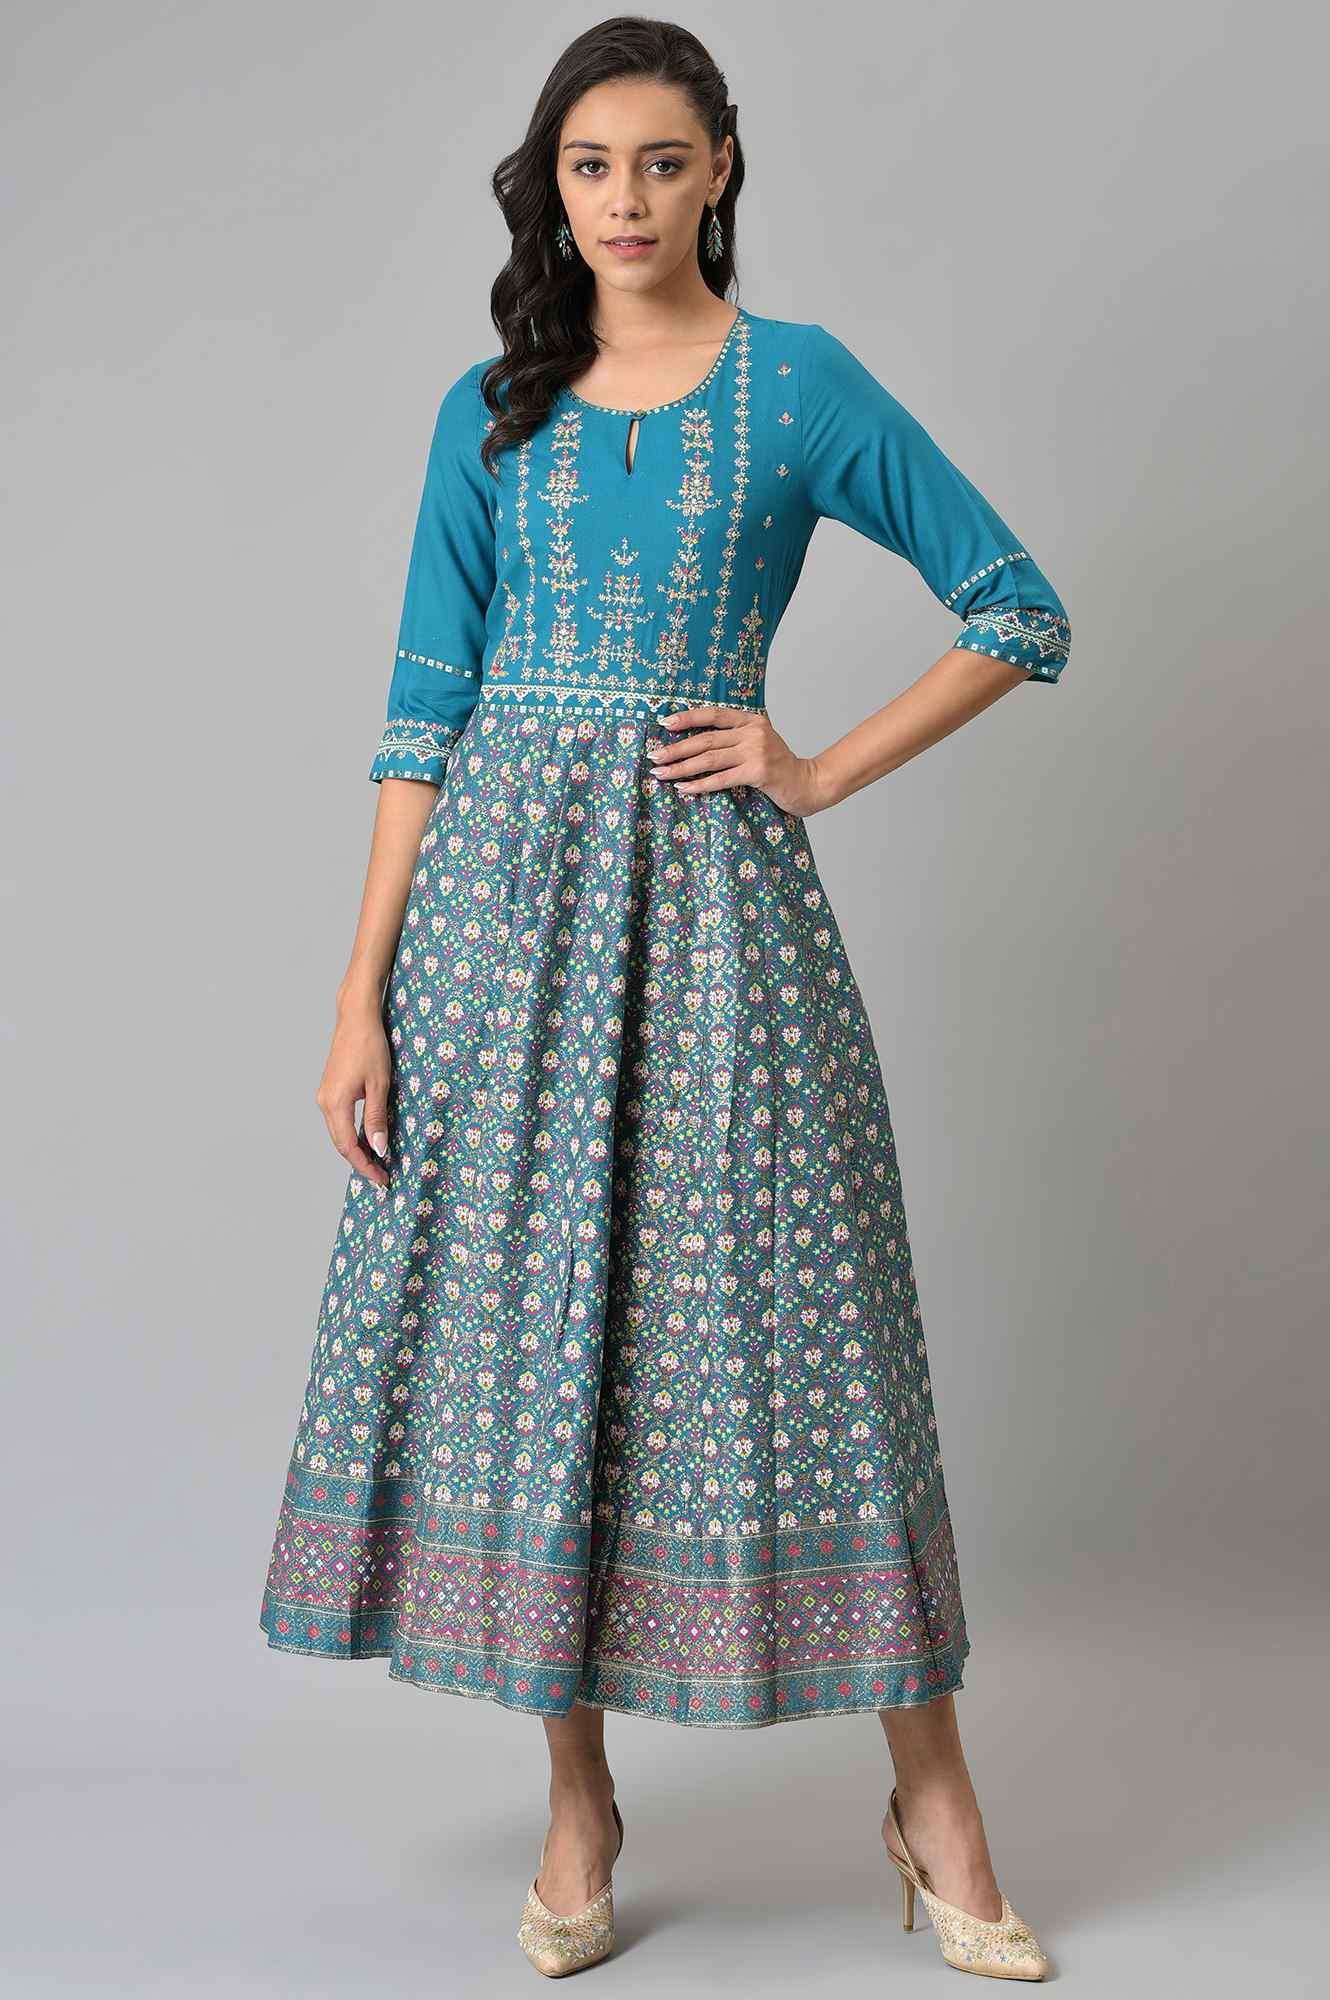 Teal Glitter Printed Dress With Embroidery - wforwoman